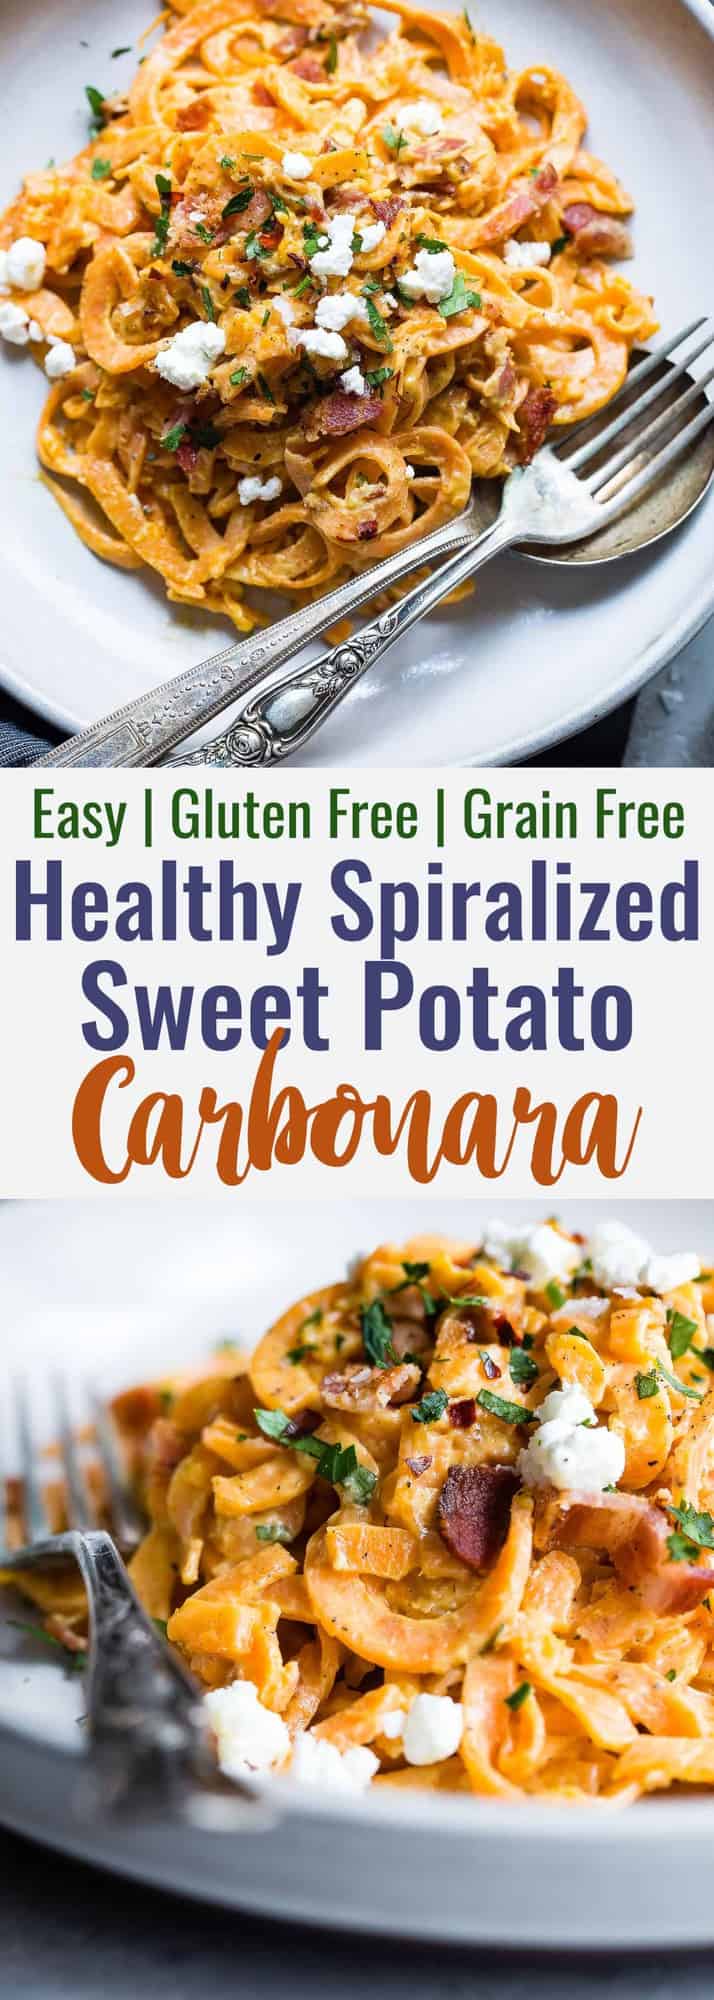 Healthy Sweet Potato Noodle Carbonara -A healthy and gluten free twist on the classic carbonara recipe that uses goat cheese to make it extra creamy! Quick, easy, family friendly and only 4 ingredients! Even picky eaters will LOVE it! | #Foodfaithfitness | #Glutenfree #Healthy #Spiralized #Grainfree #Sweetpotato